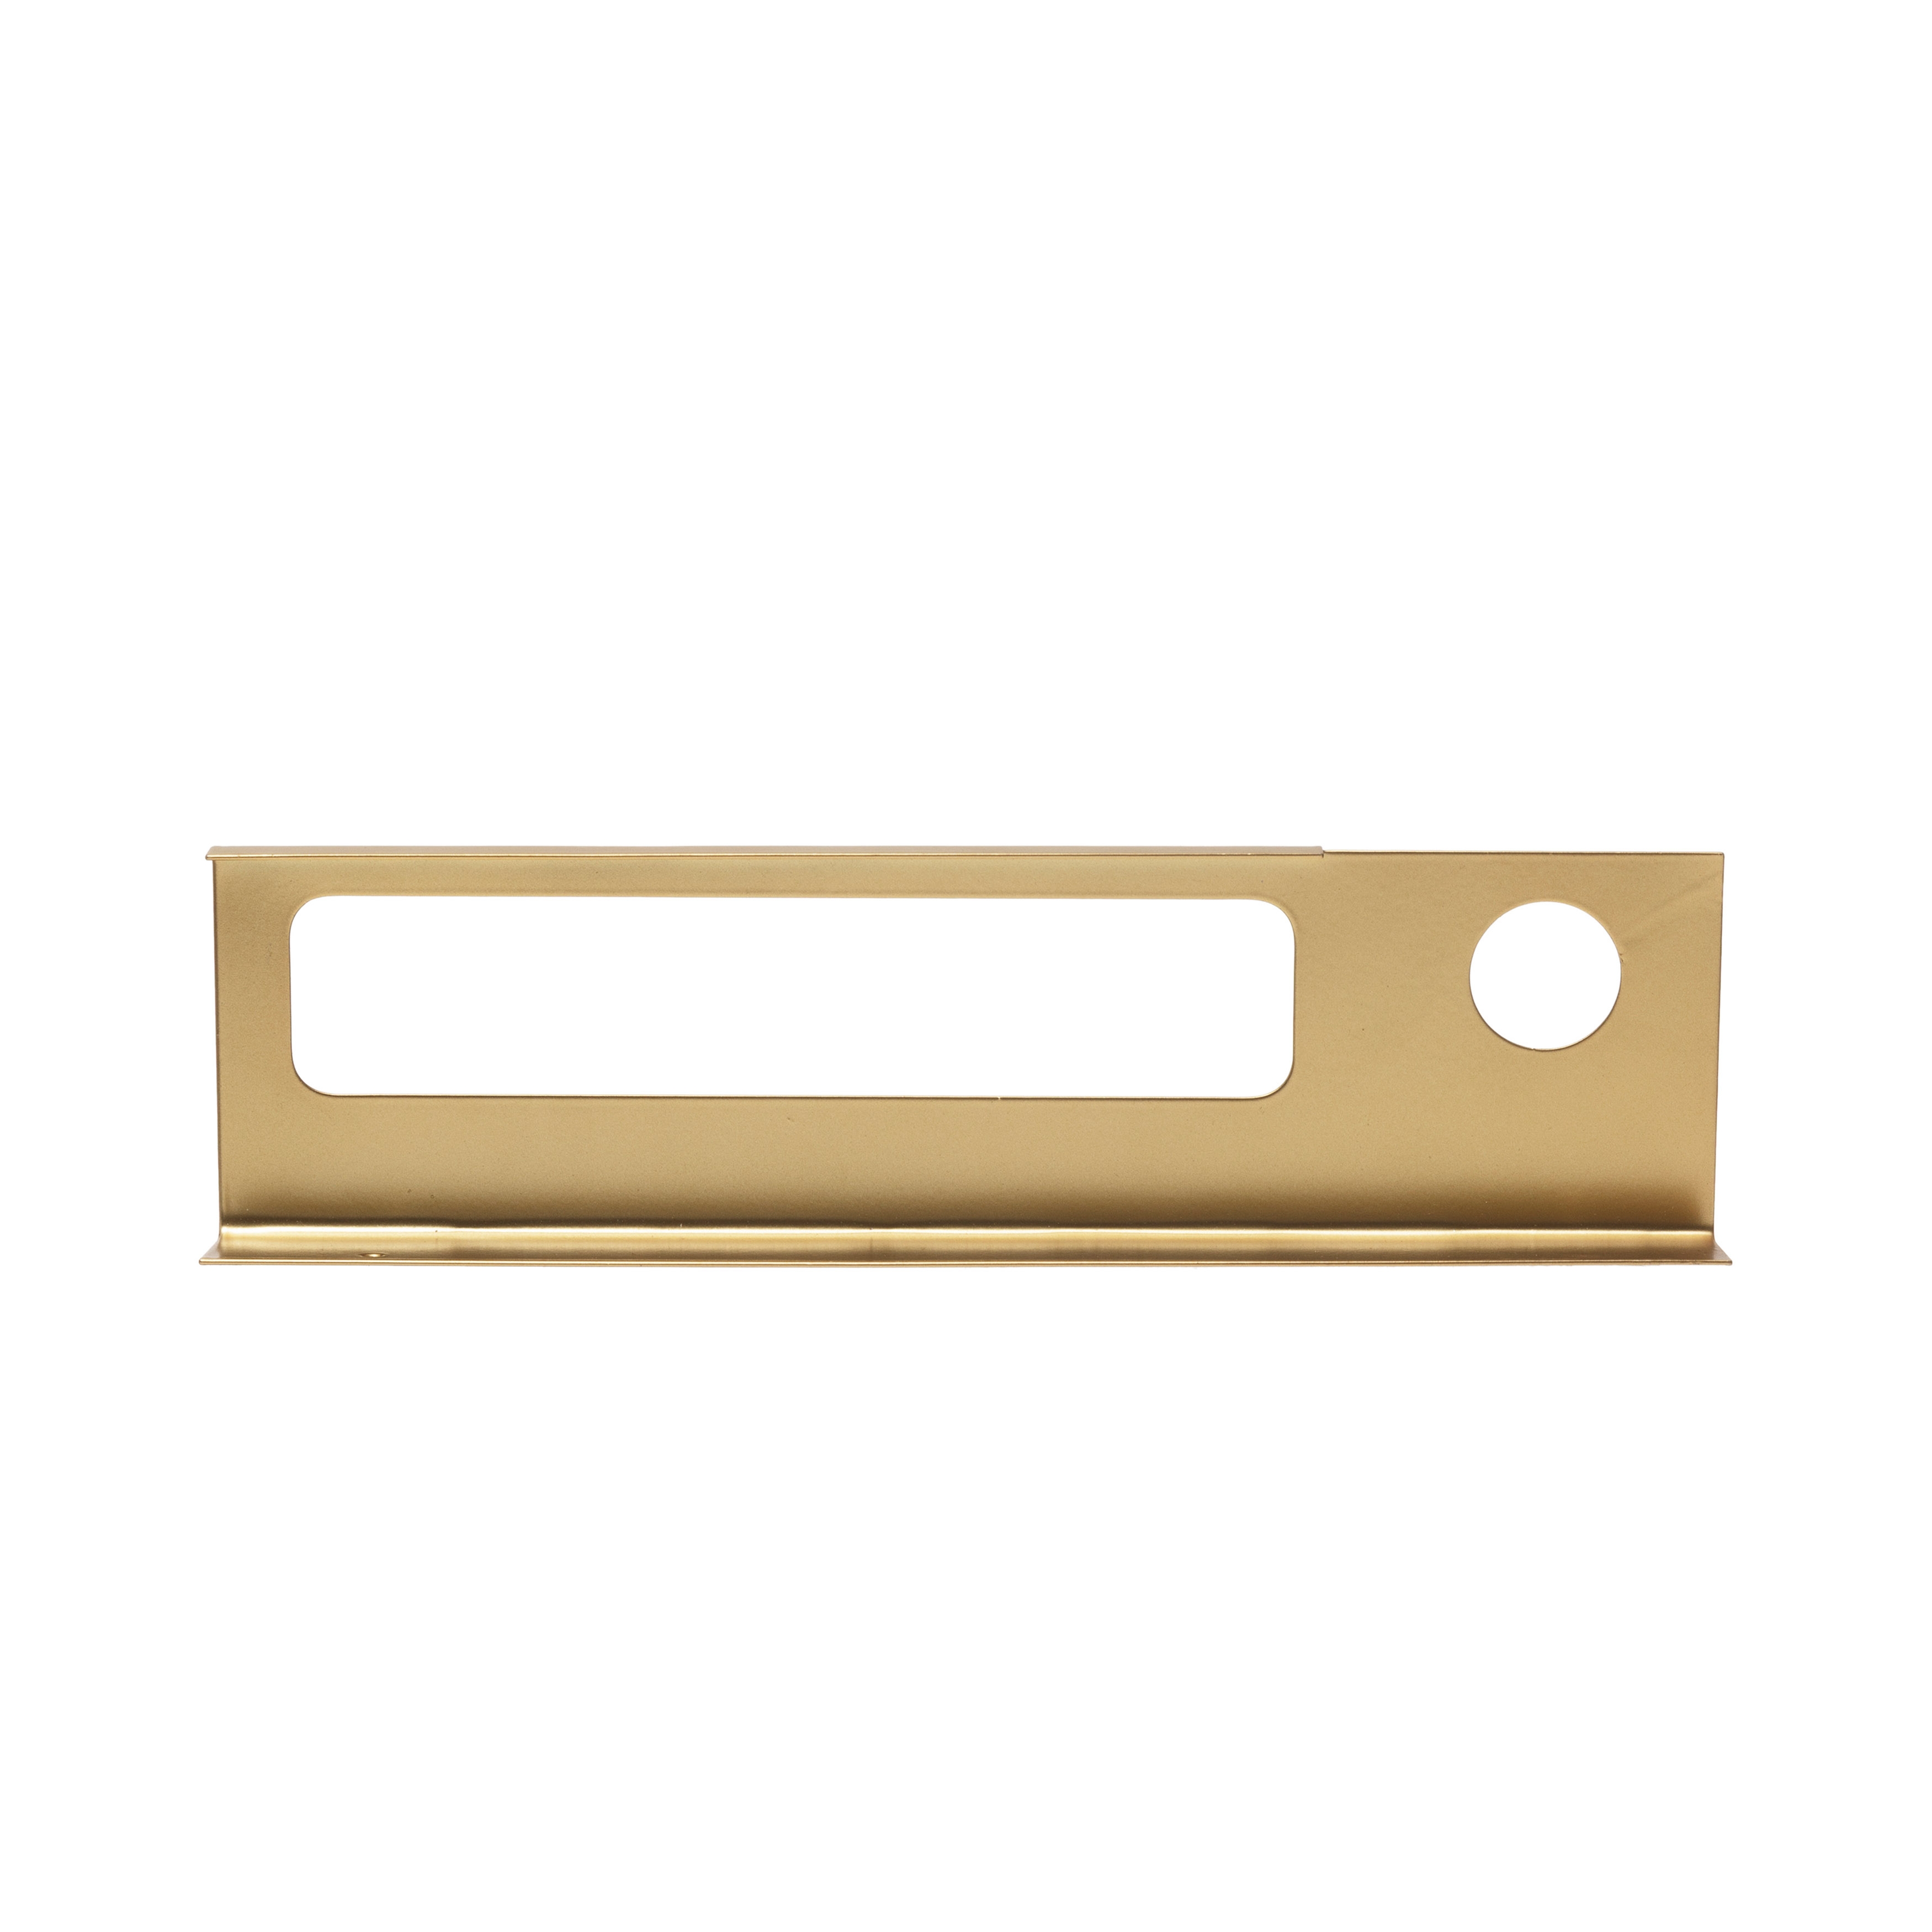  Metal Wall Rack with Bottle Holder, Gold Finish - Image 0